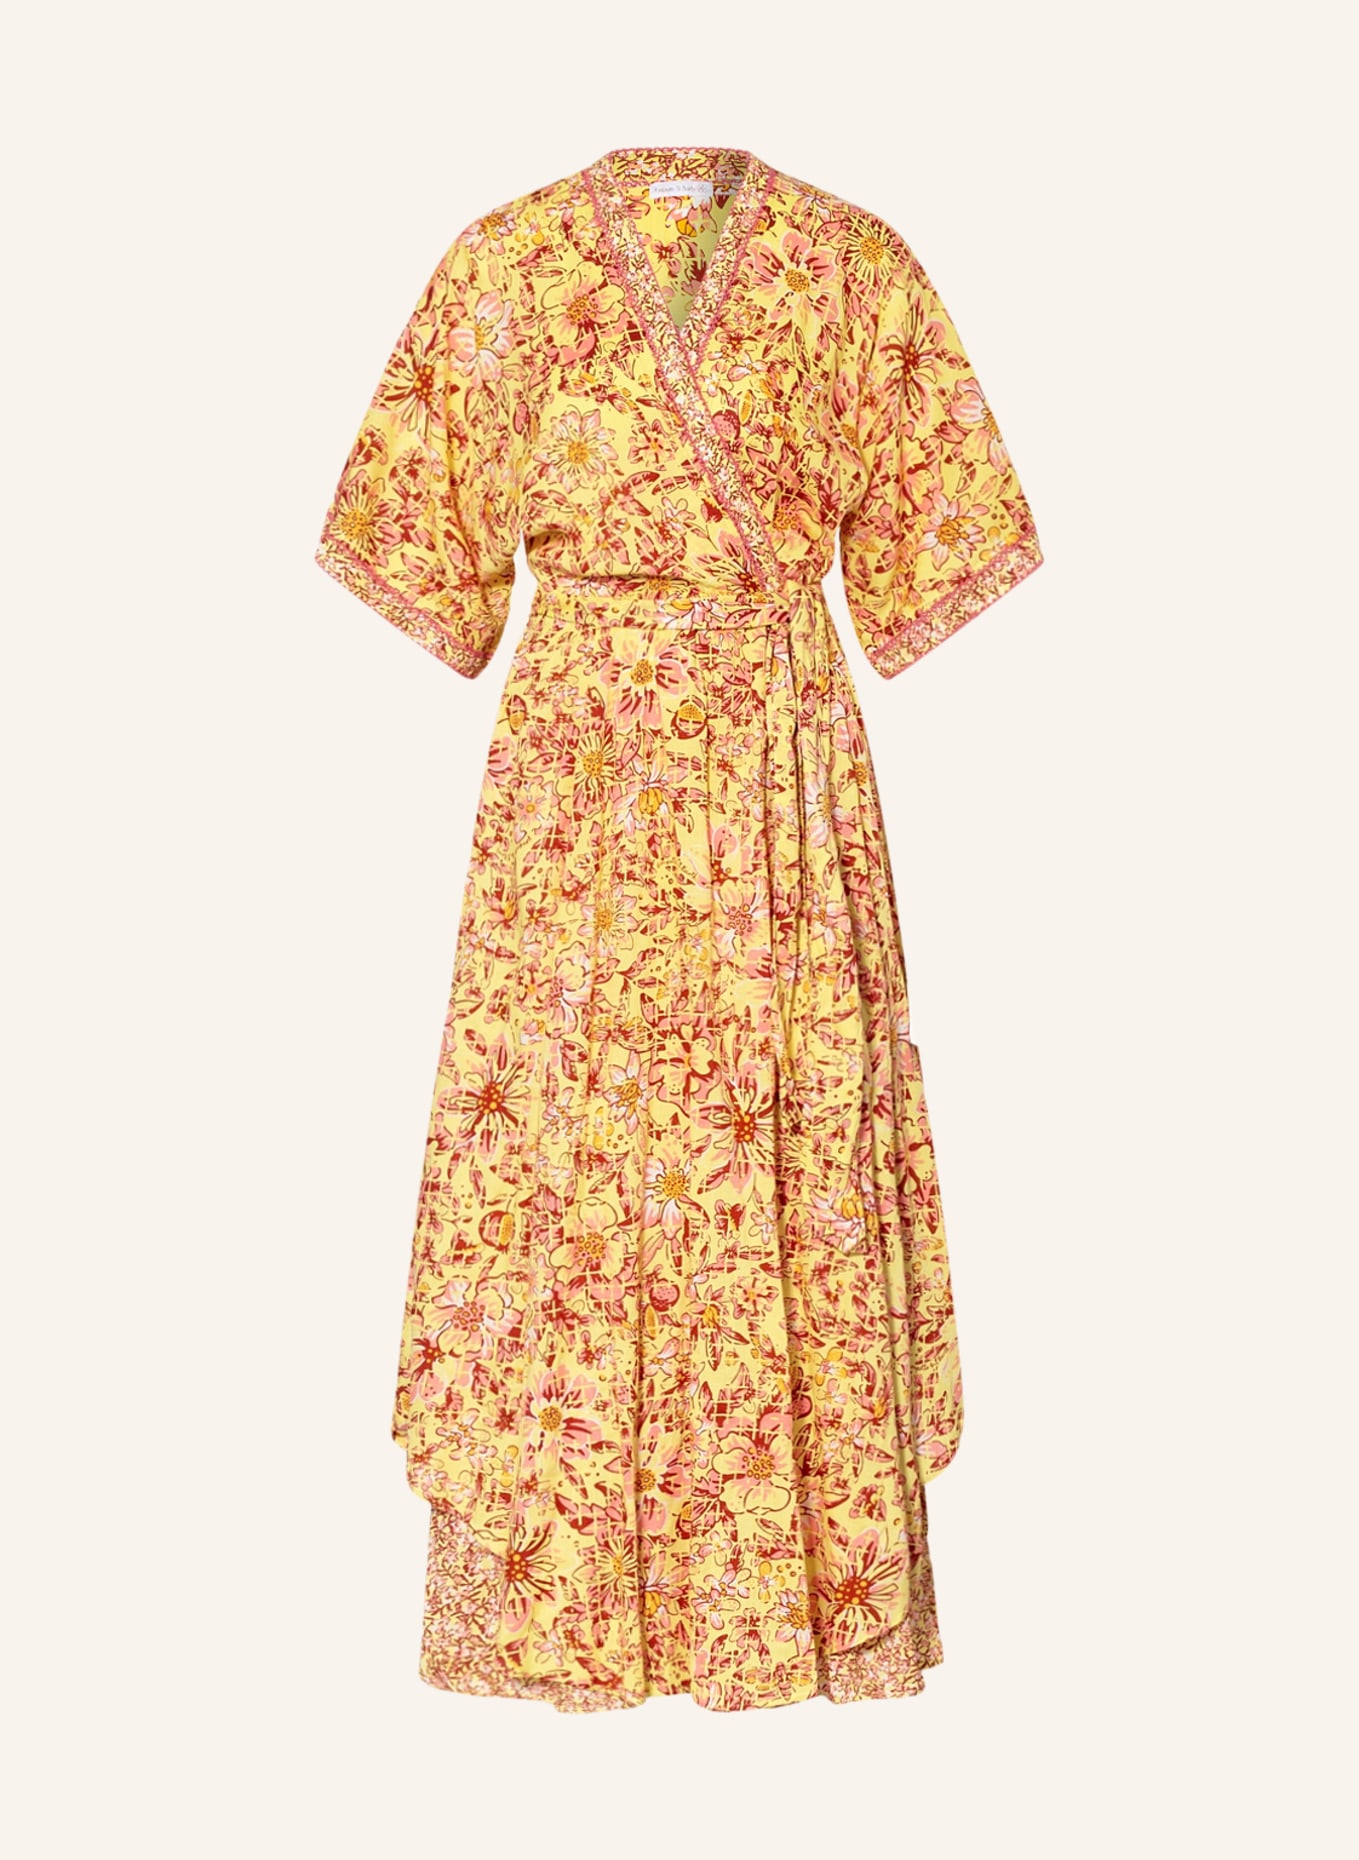 Poupette St Barth Beach dress ADHA in wrap look with 3/4 sleeves, Color: YELLOW/ DARK RED/ LIGHT RED (Image 1)